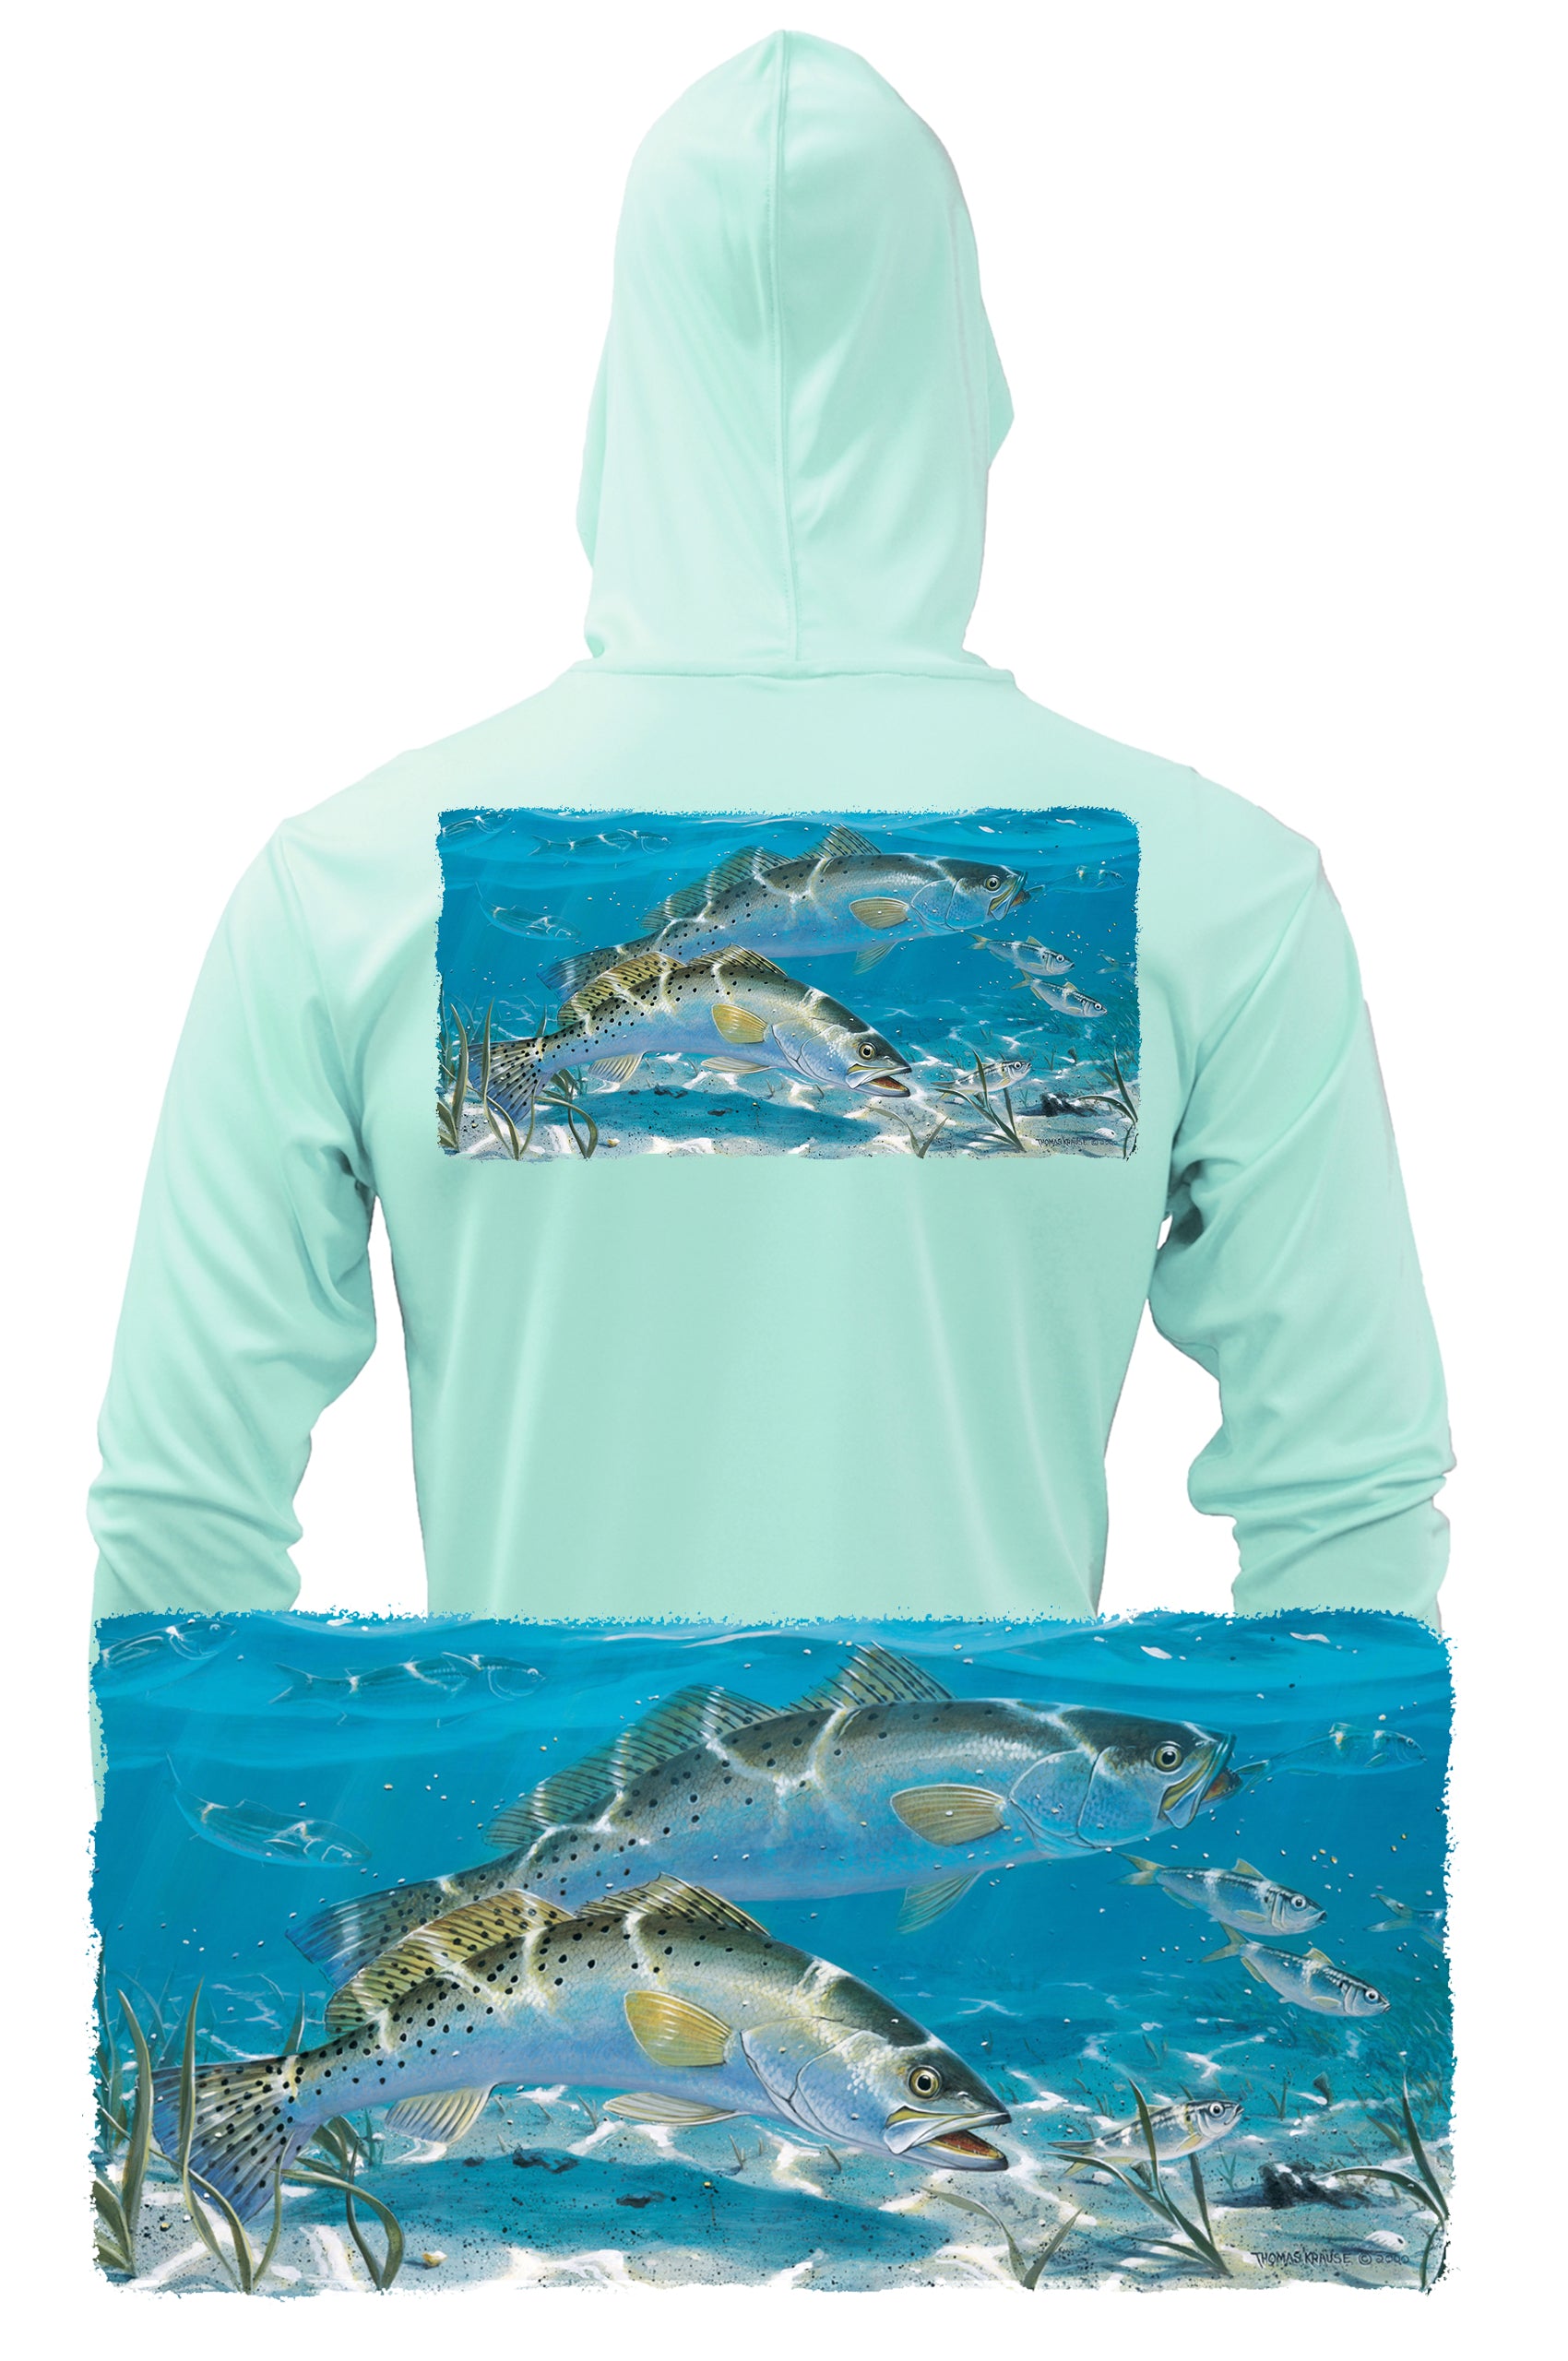 Spotted Sea Trout Fishing Hoodie Optional Flag Sleeve 3XL / Seagrass